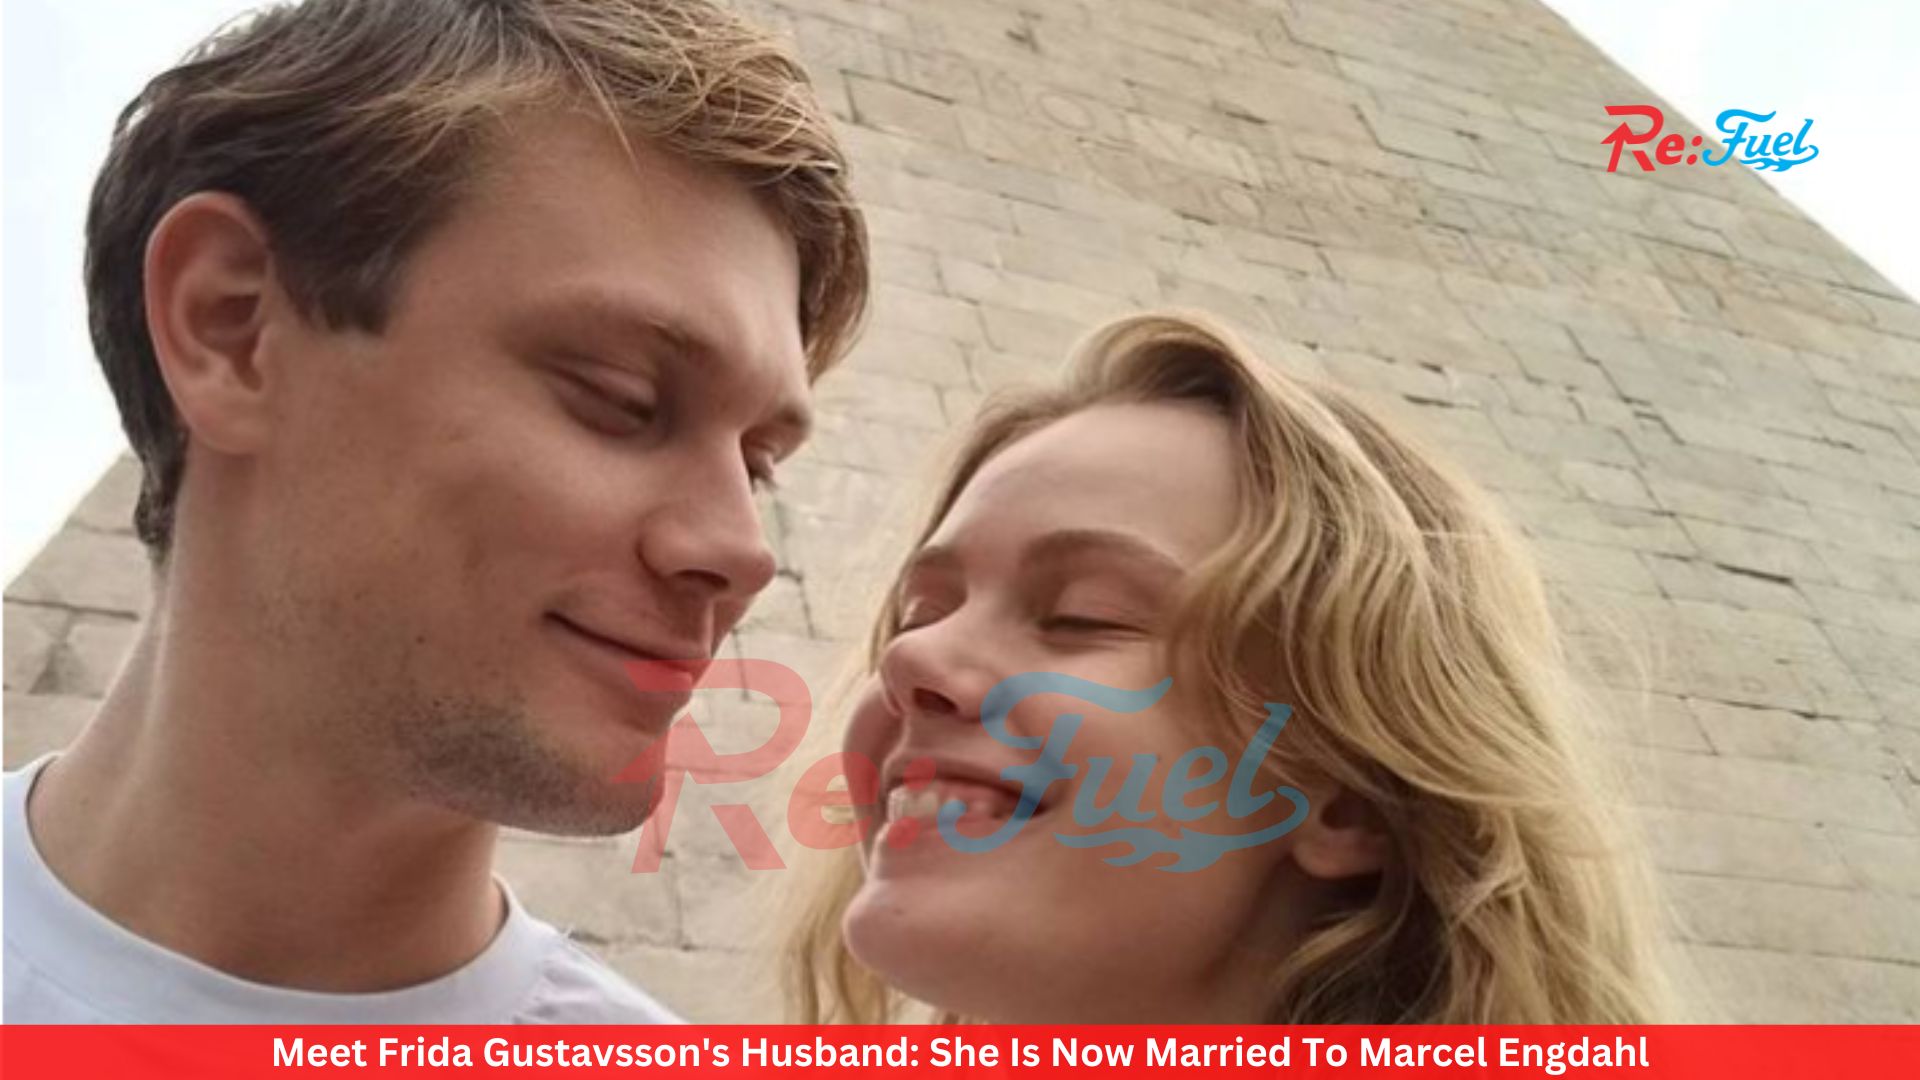 Meet Frida Gustavsson's Husband: She Is Now Married To Marcel Engdahl